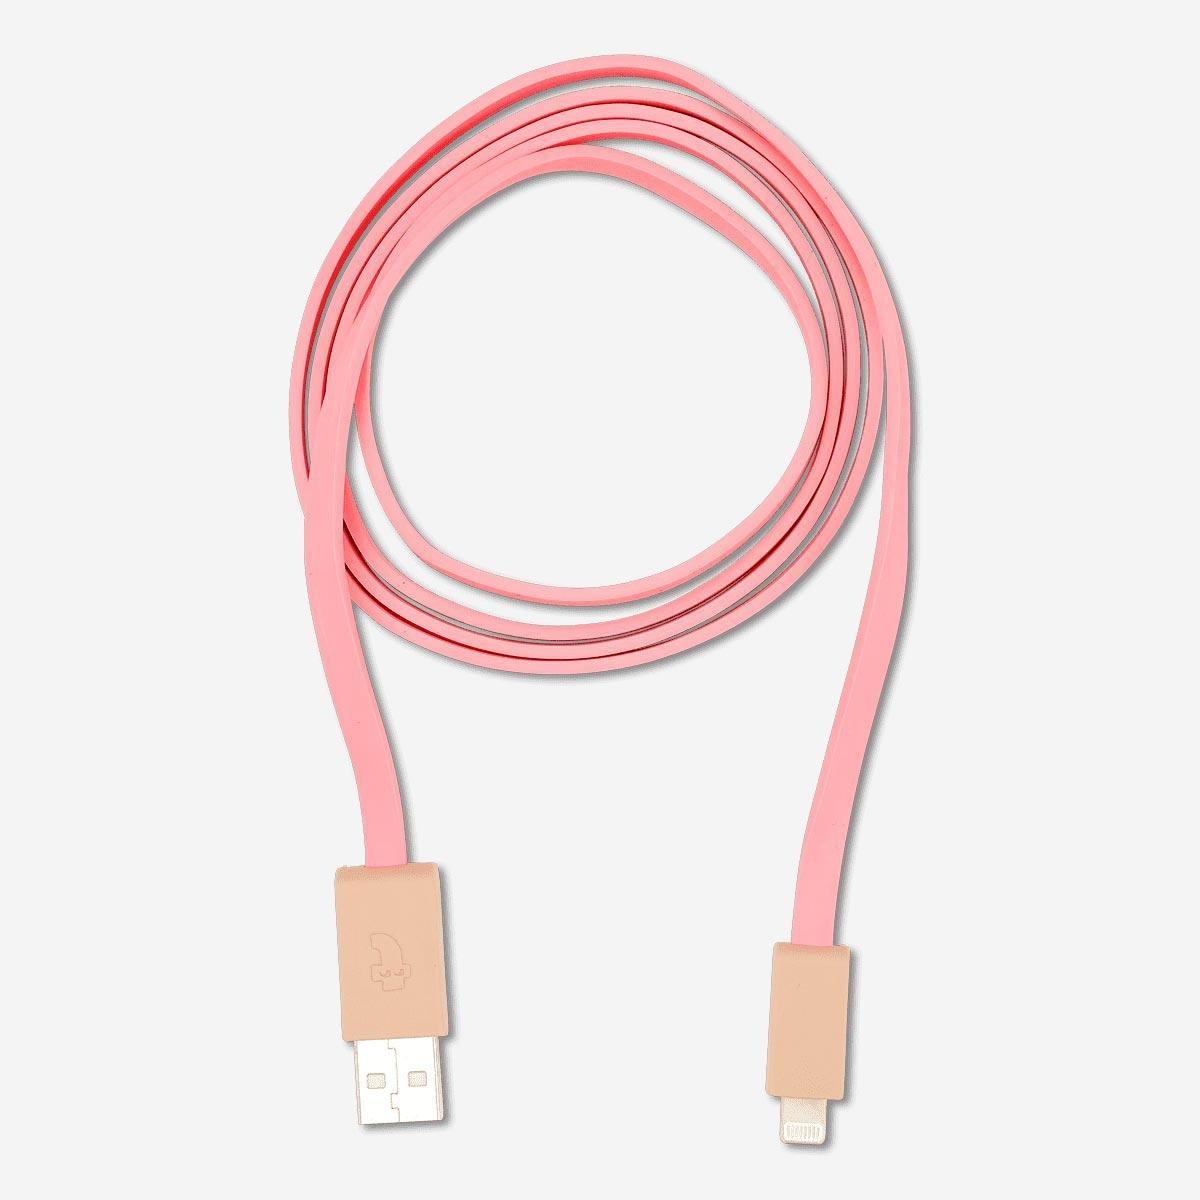 Pink iphones charging cable.